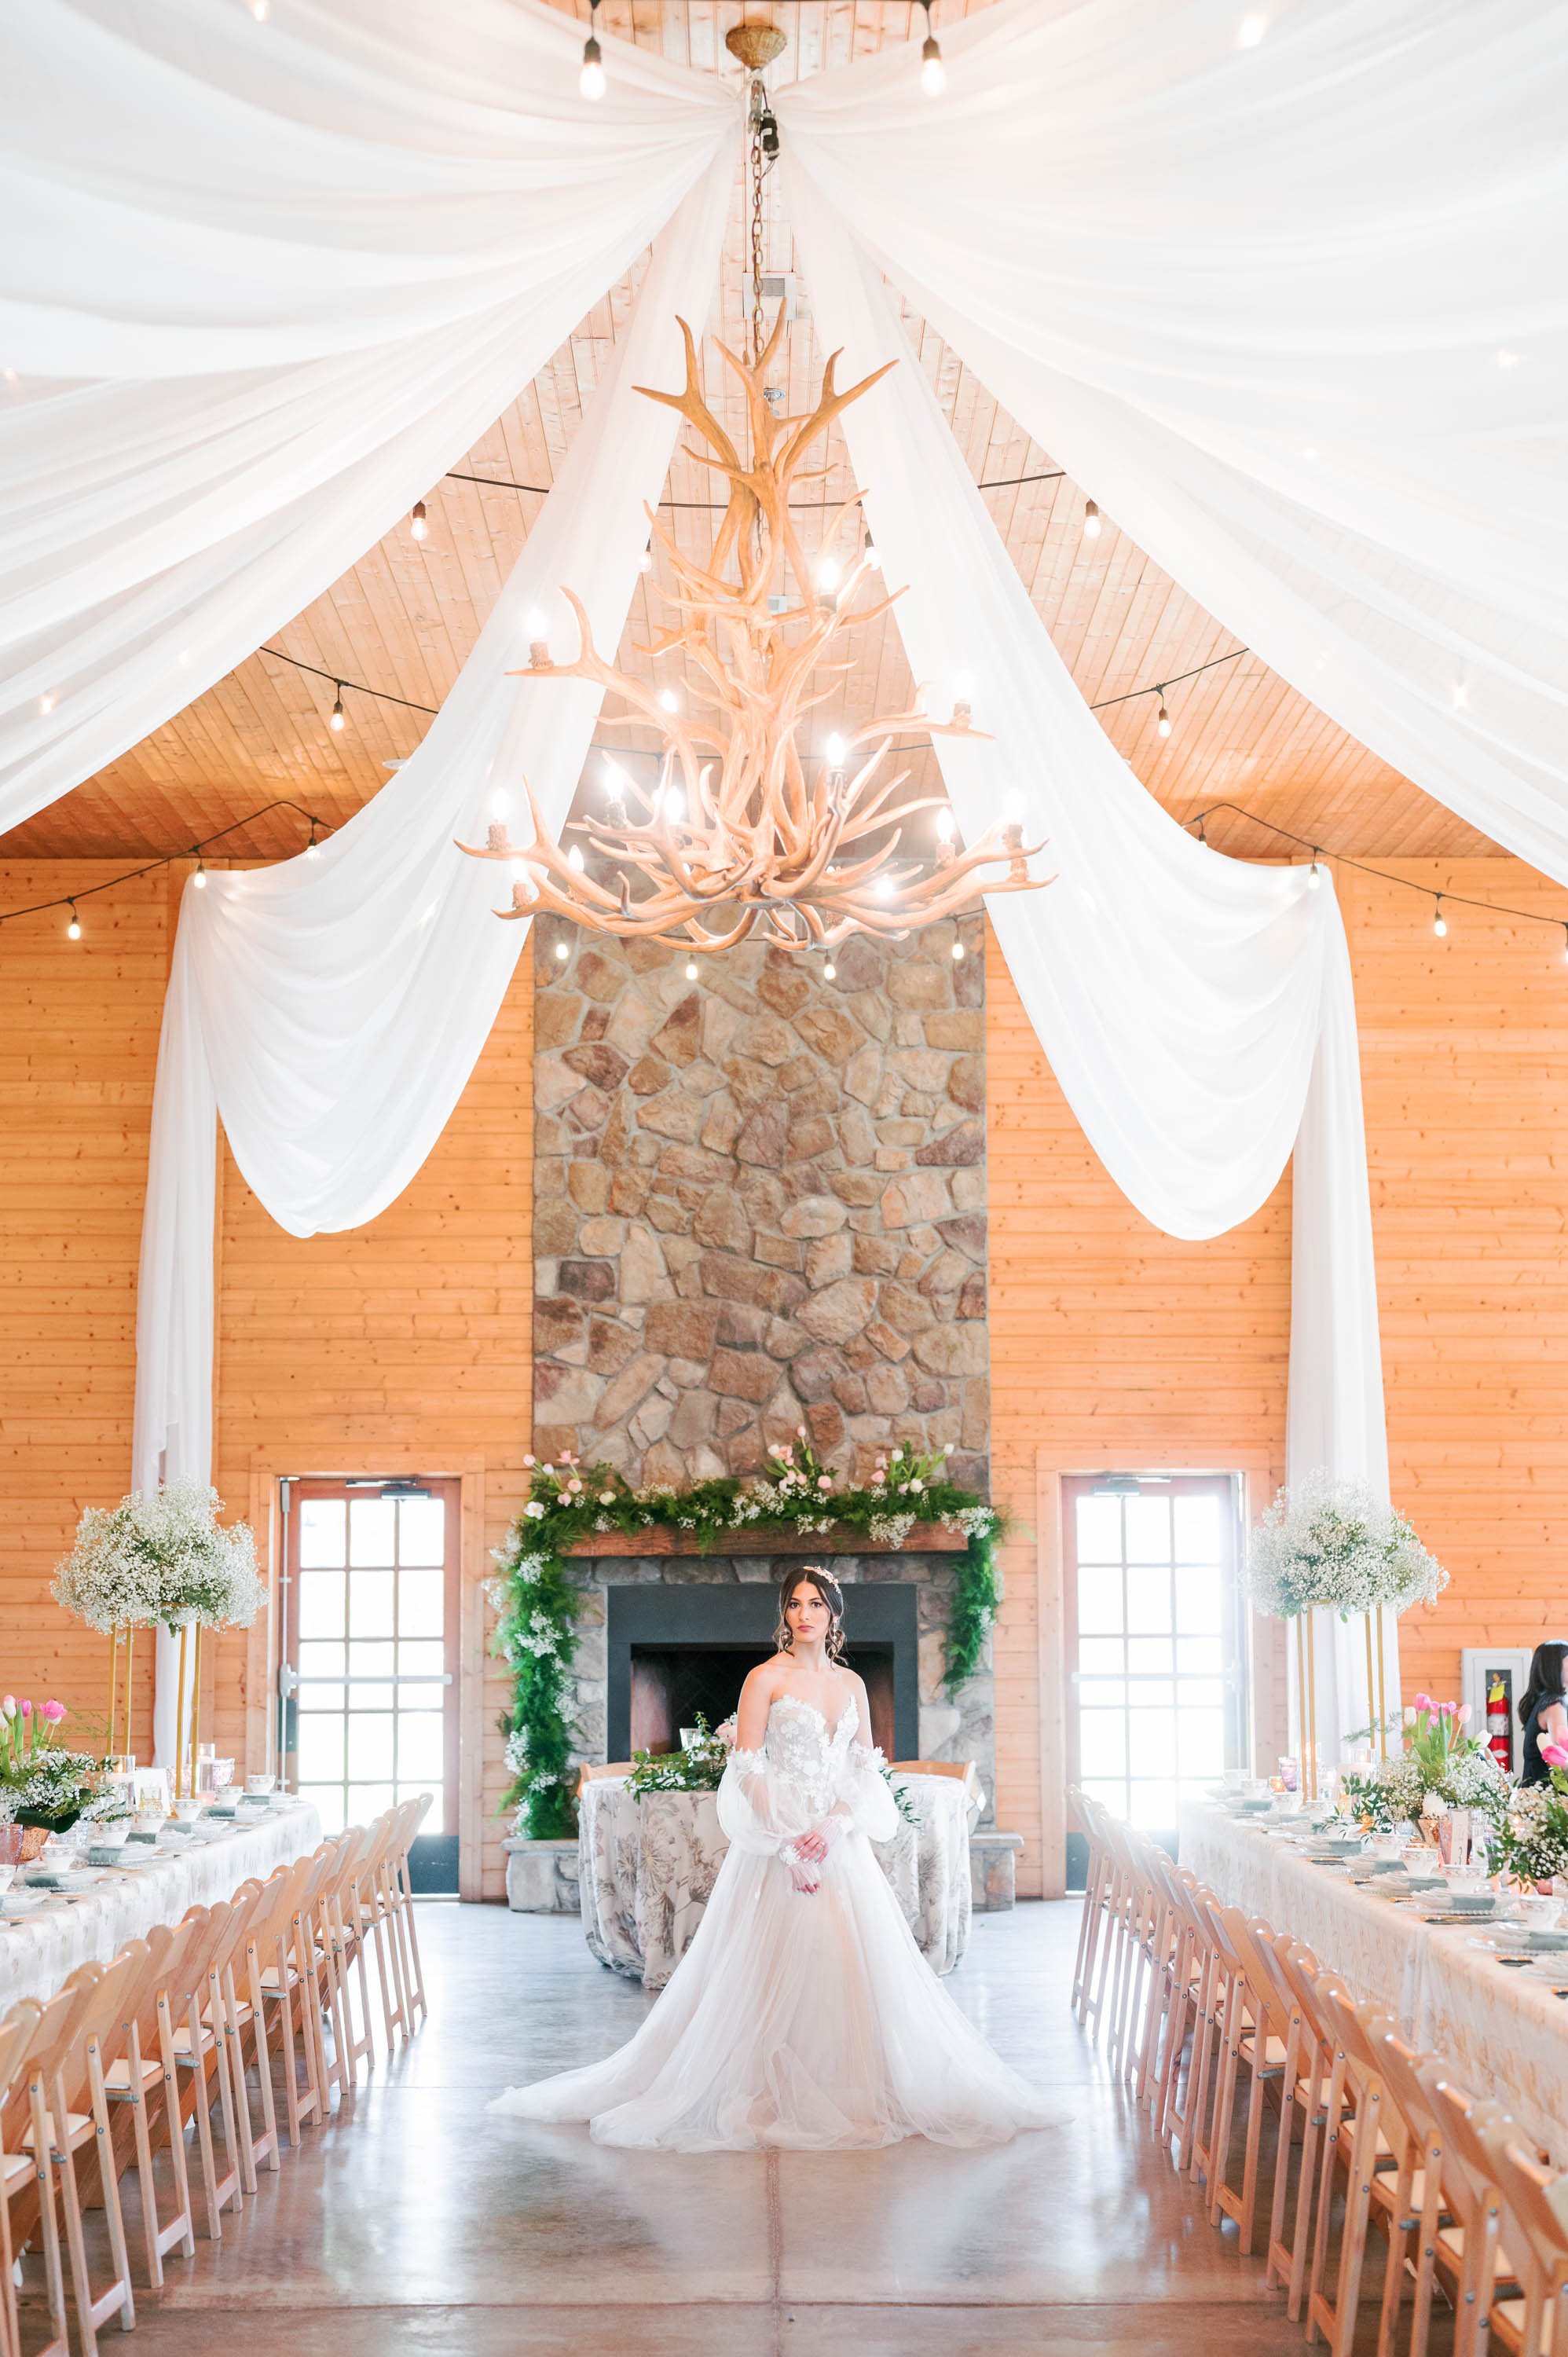  A bride wearing Chic Nostalgia Ayla standing in front of a fireplace in the reception hall at Oakland Farms near Raleigh, North Carolina. The bridal gown has a strapless sweetheart bodice adorned with floral lace appliqués and a full tulle skirt wit